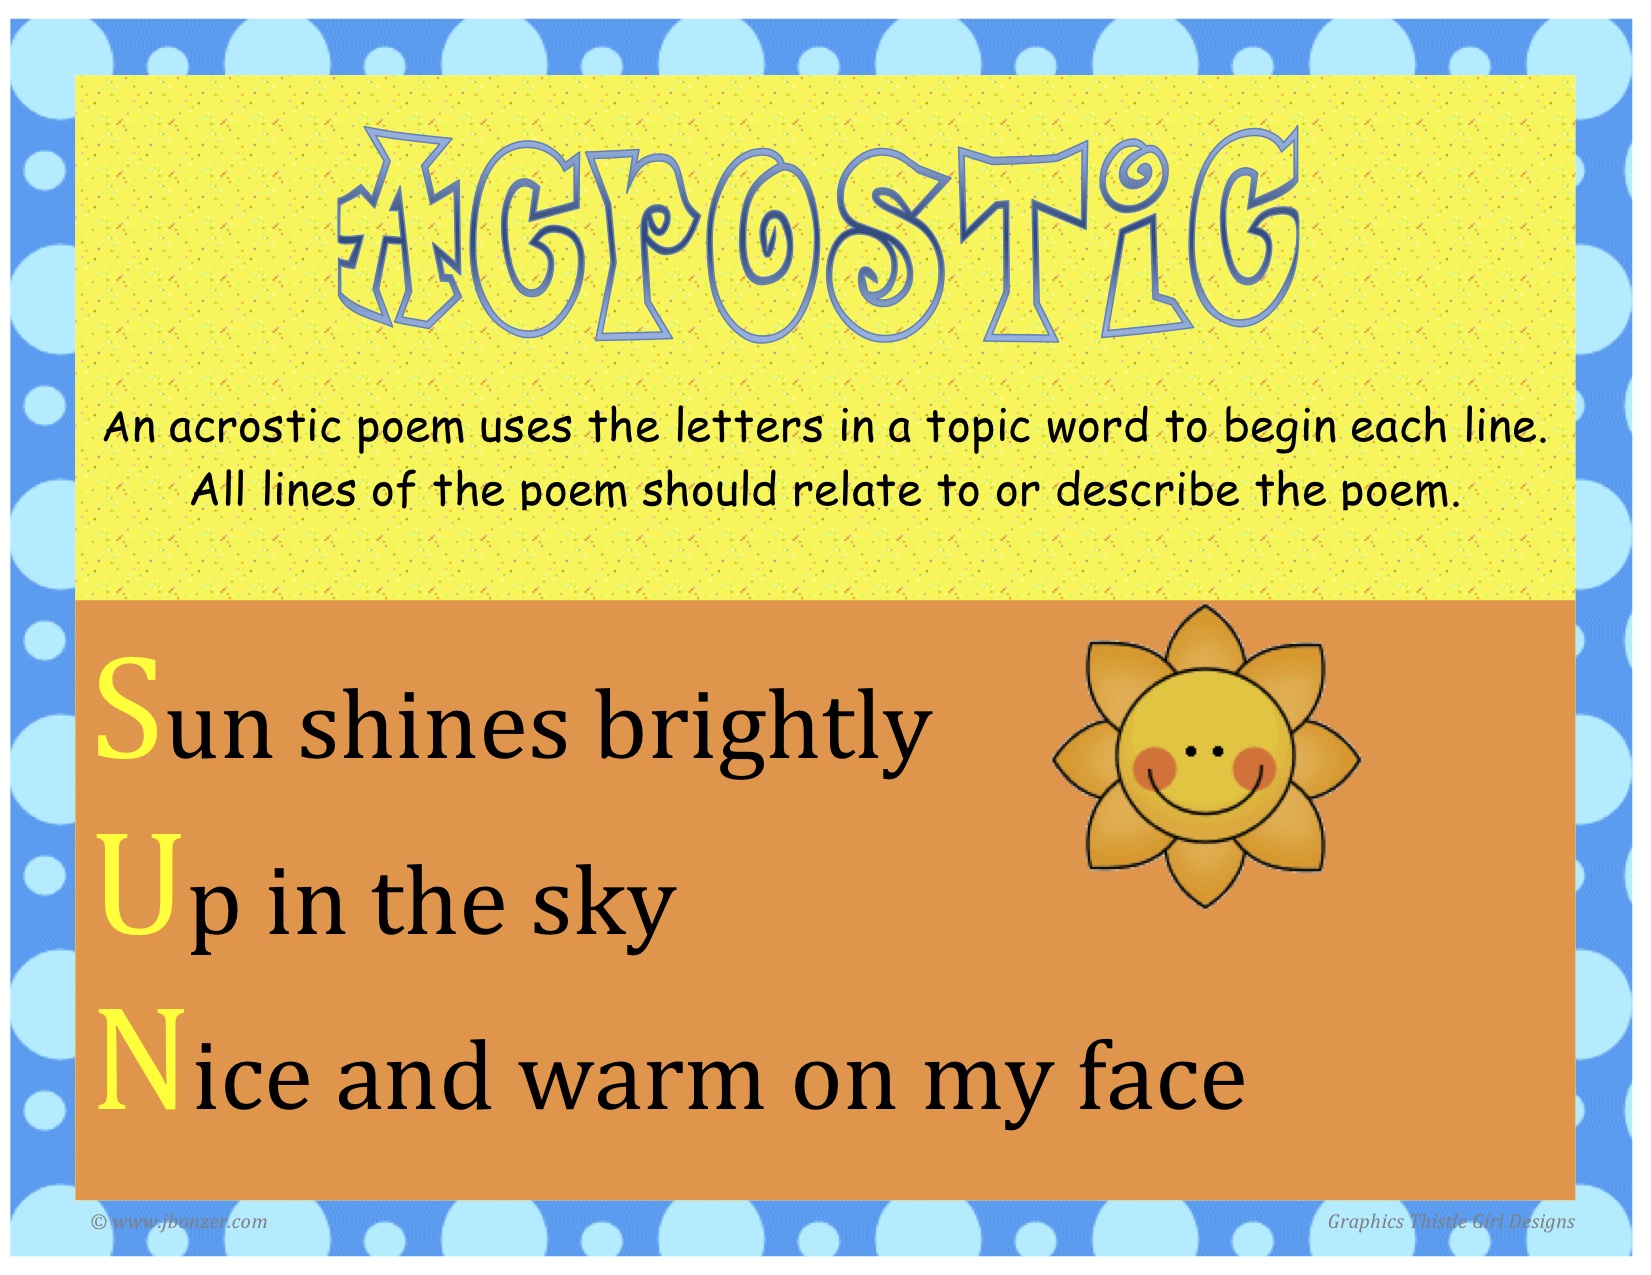 Easy spring poetry ideas | Acrostic poems and color poems